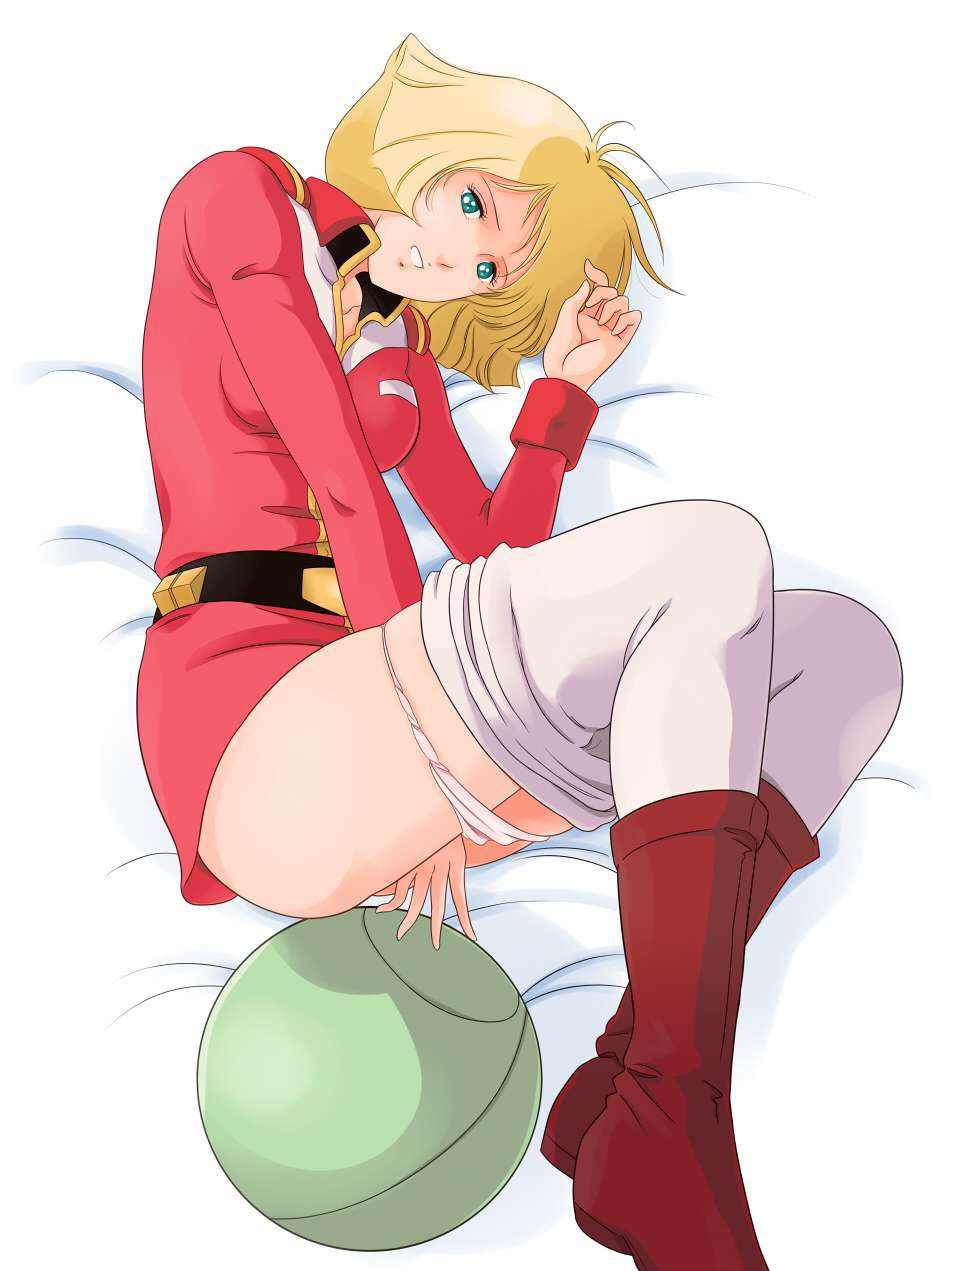 Erotic images that show the charm of Mobile Suit Gundam 5